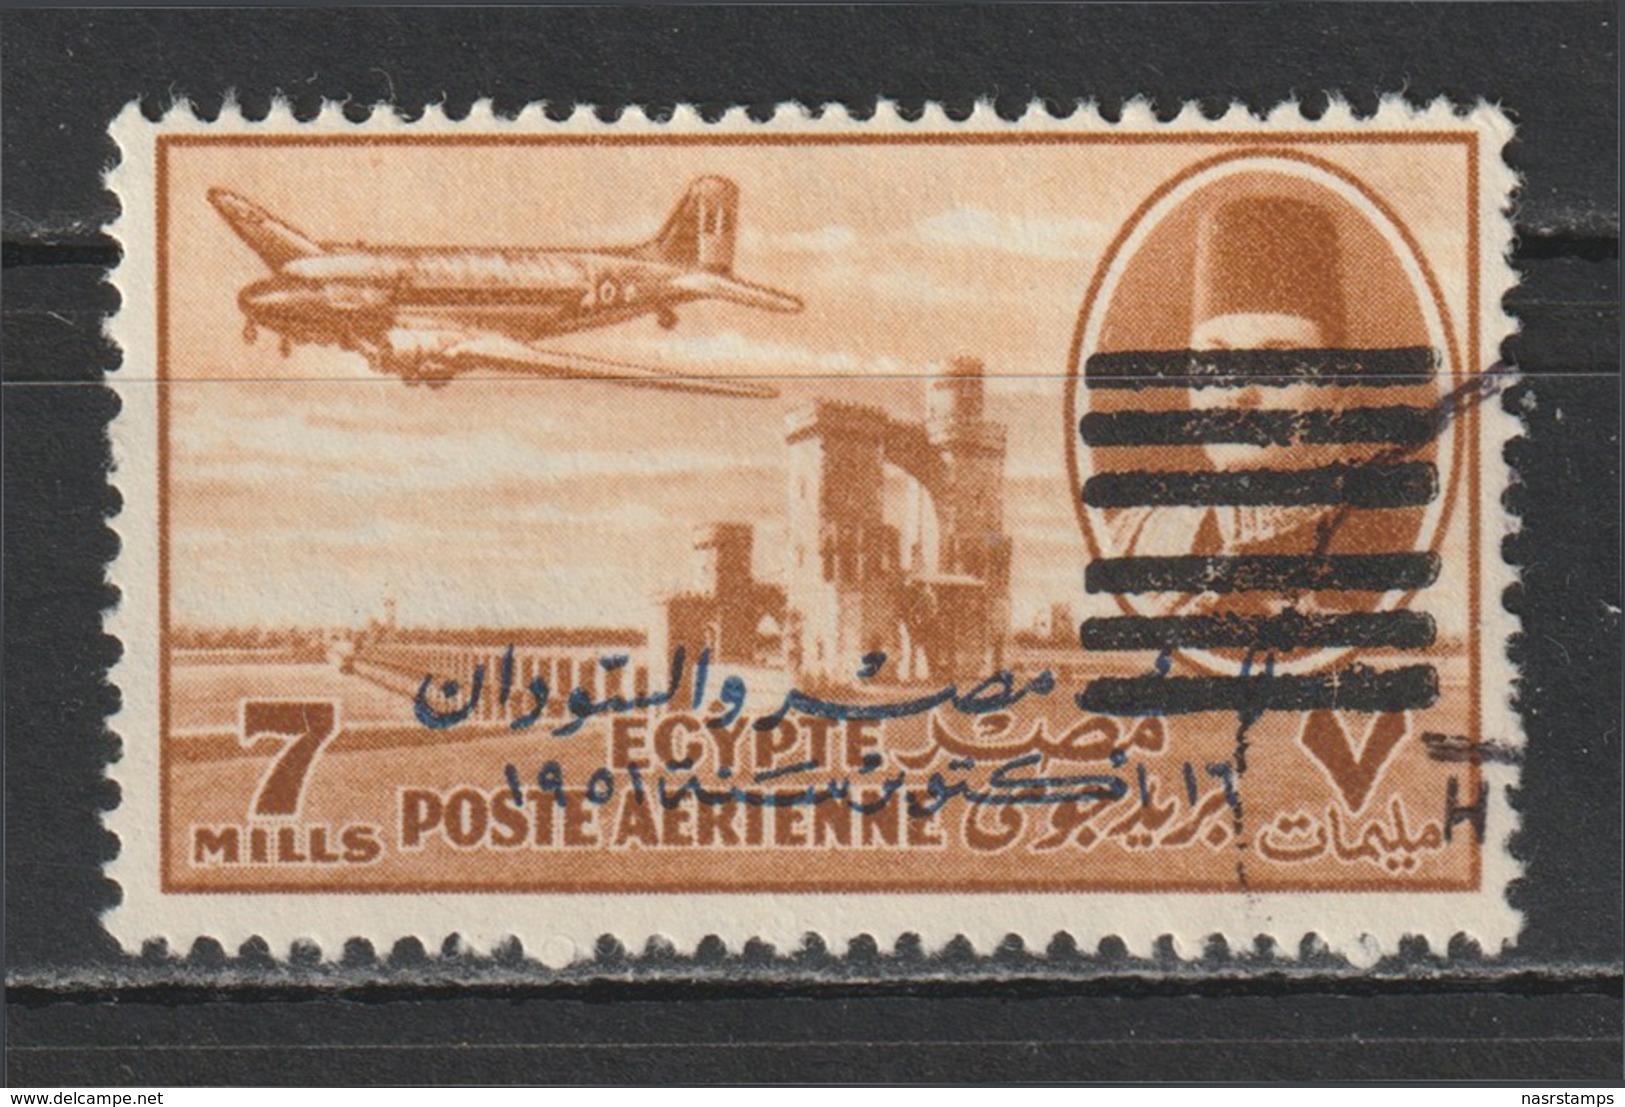 Egypt - 1953 - Unlisted - Unrecorded - Scarce - ( King Farouk - Overprinted 6 Bars On M/s - 7m  ) - Used - No Gum - Usados